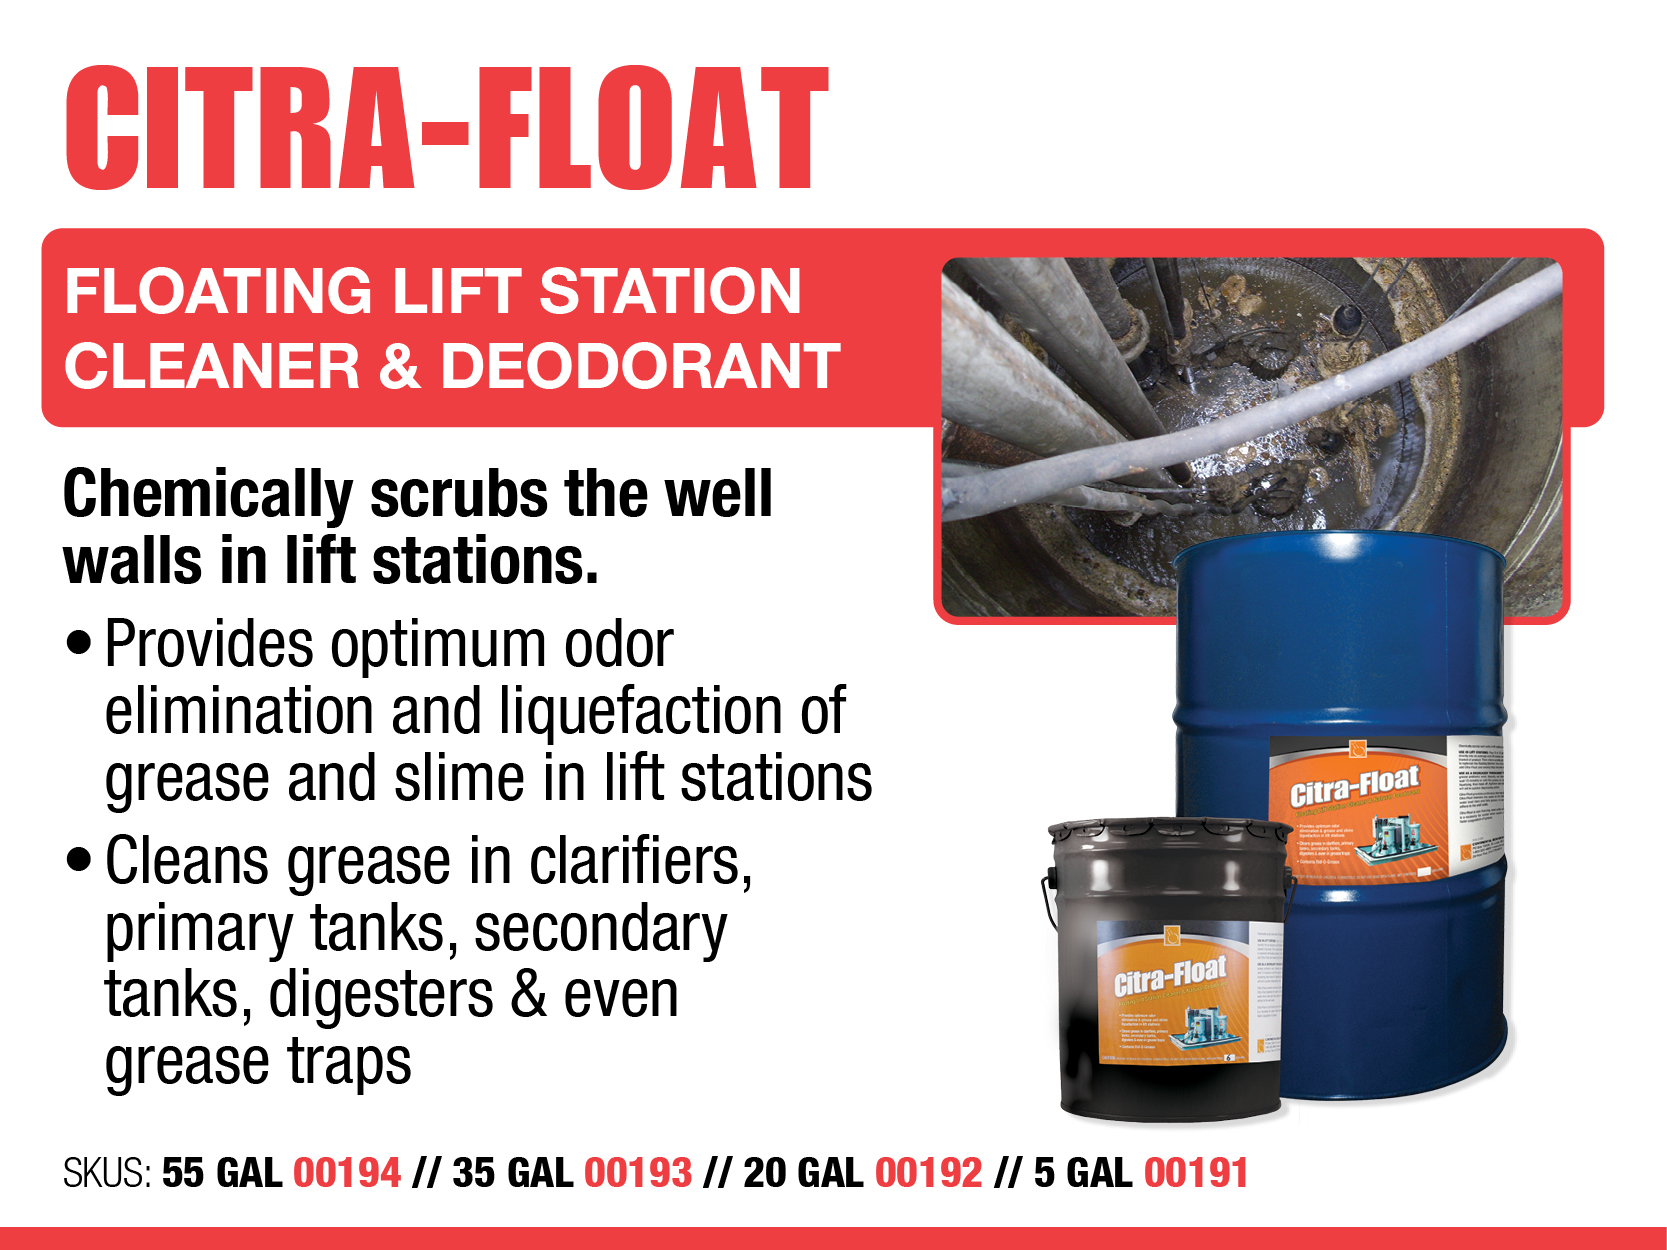 Citra-Float -Floating Lift Station Cleaner & Deodorant - Wastewater Essentials  - Collections, Plants, and Lagoons - Wastewater Treatment